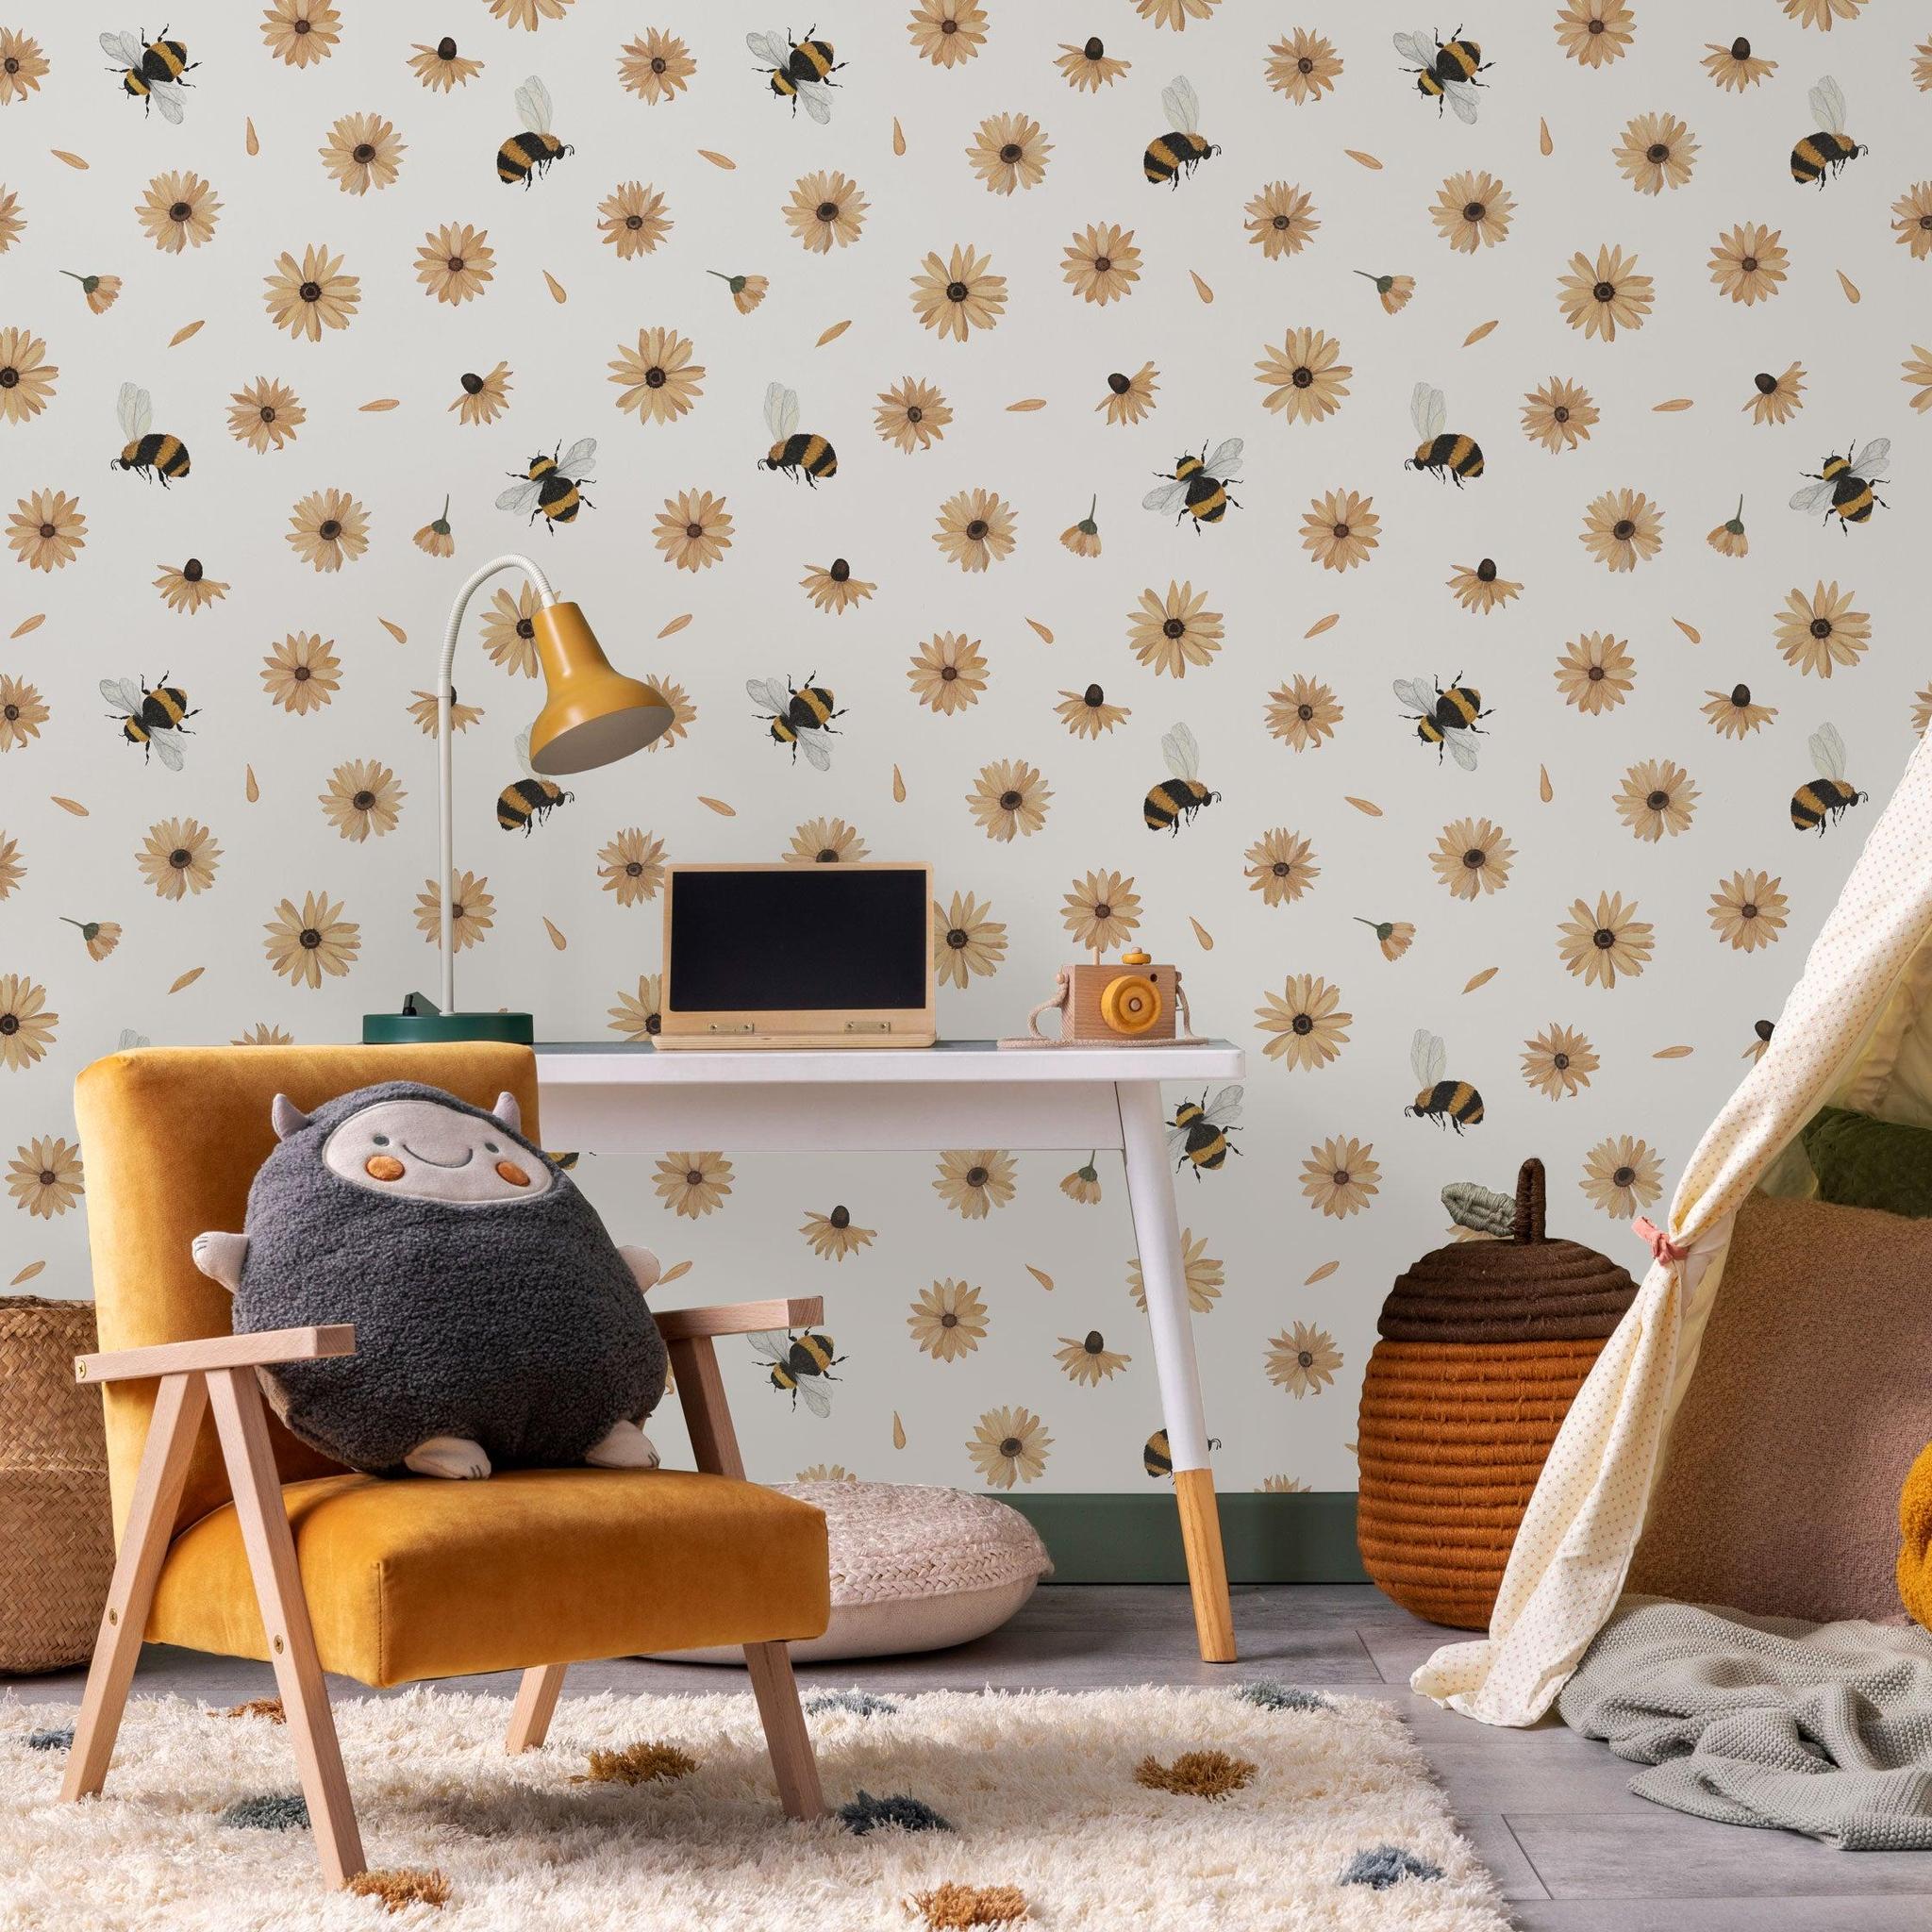 Bumble (White) Wallpaper by Wall Blush in cozy child's room setup, featuring playful bee and daisy design.
